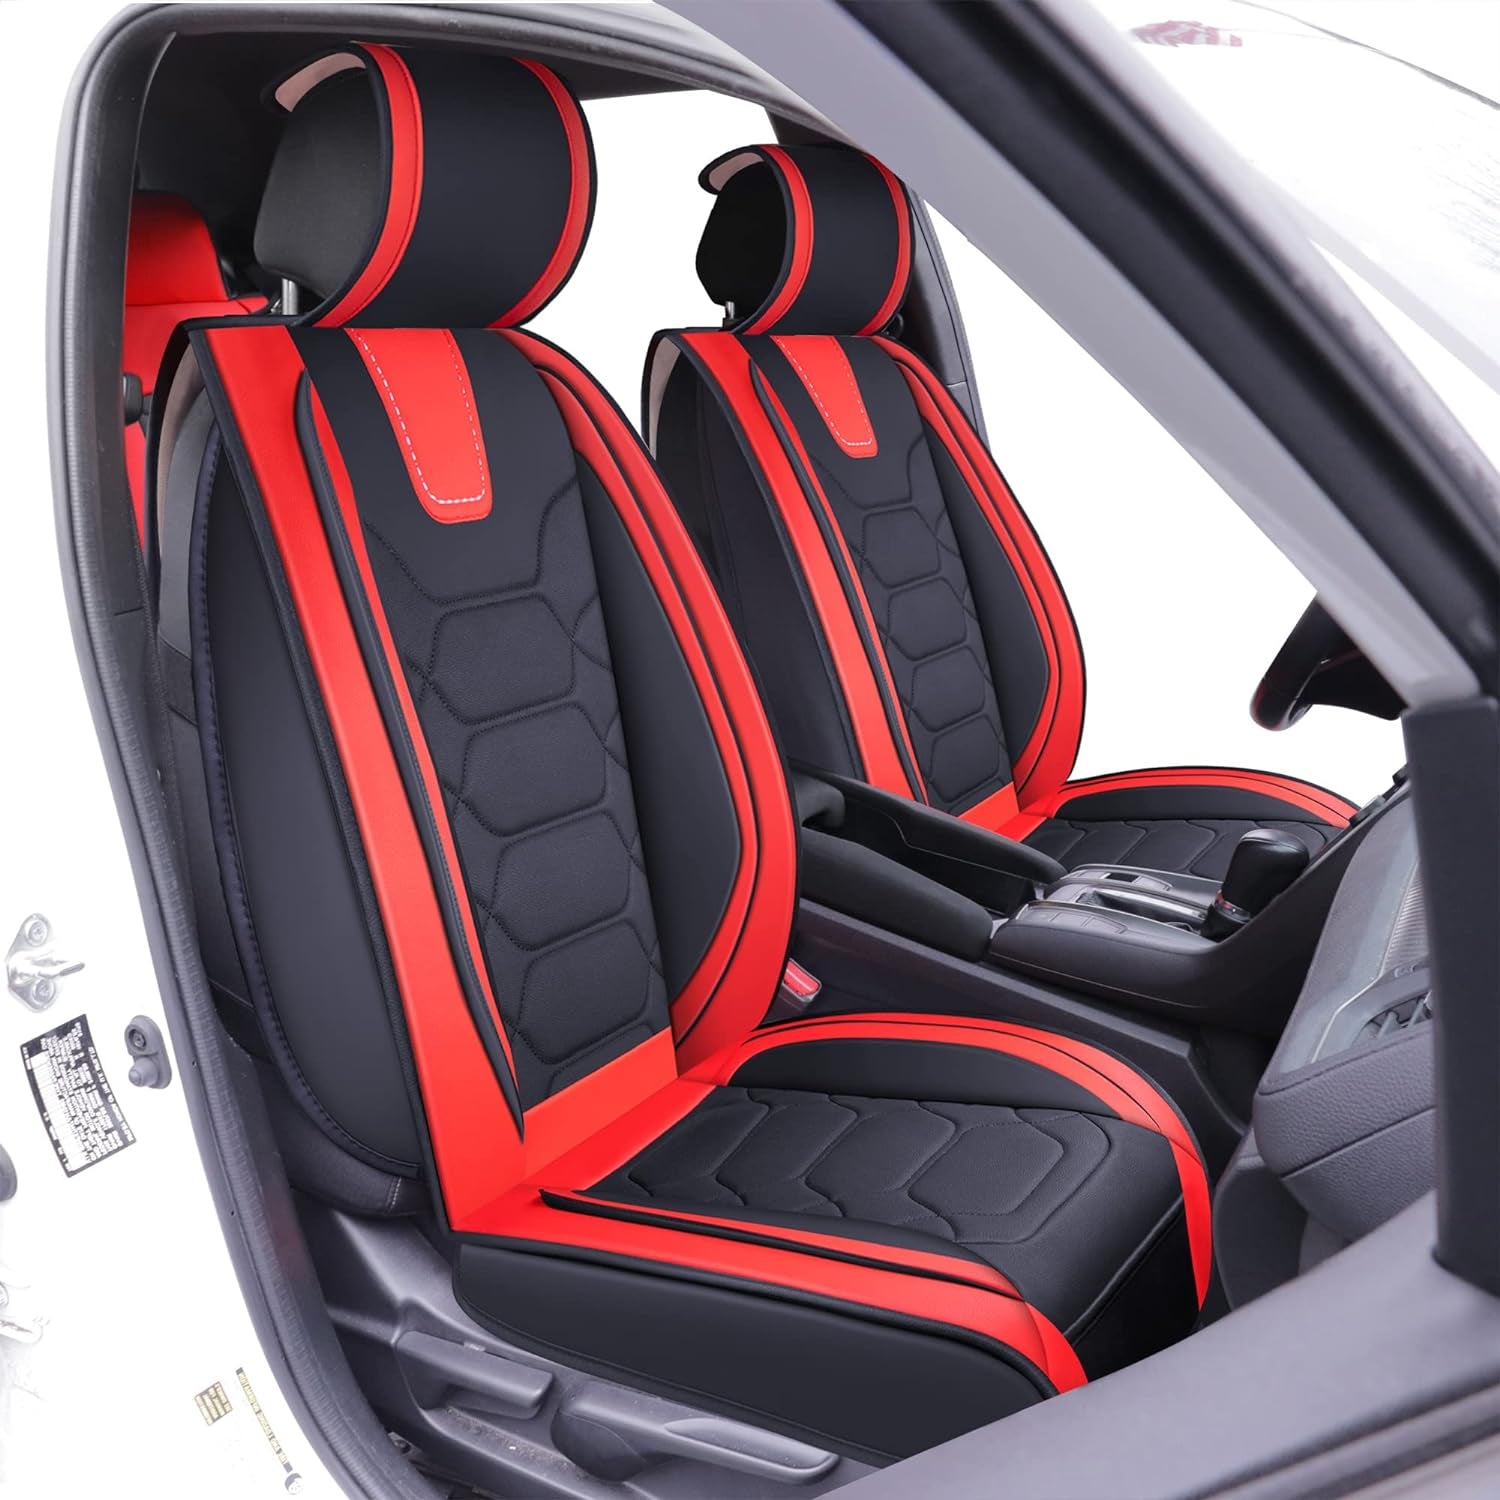 Honda Civic Accessories Seat Covers 2011-2025 Custom Fit 2/4 Door Sedan Coupe Hatchback Leather Cover Protector Cushion Exclude Si (Front Pair, Red)